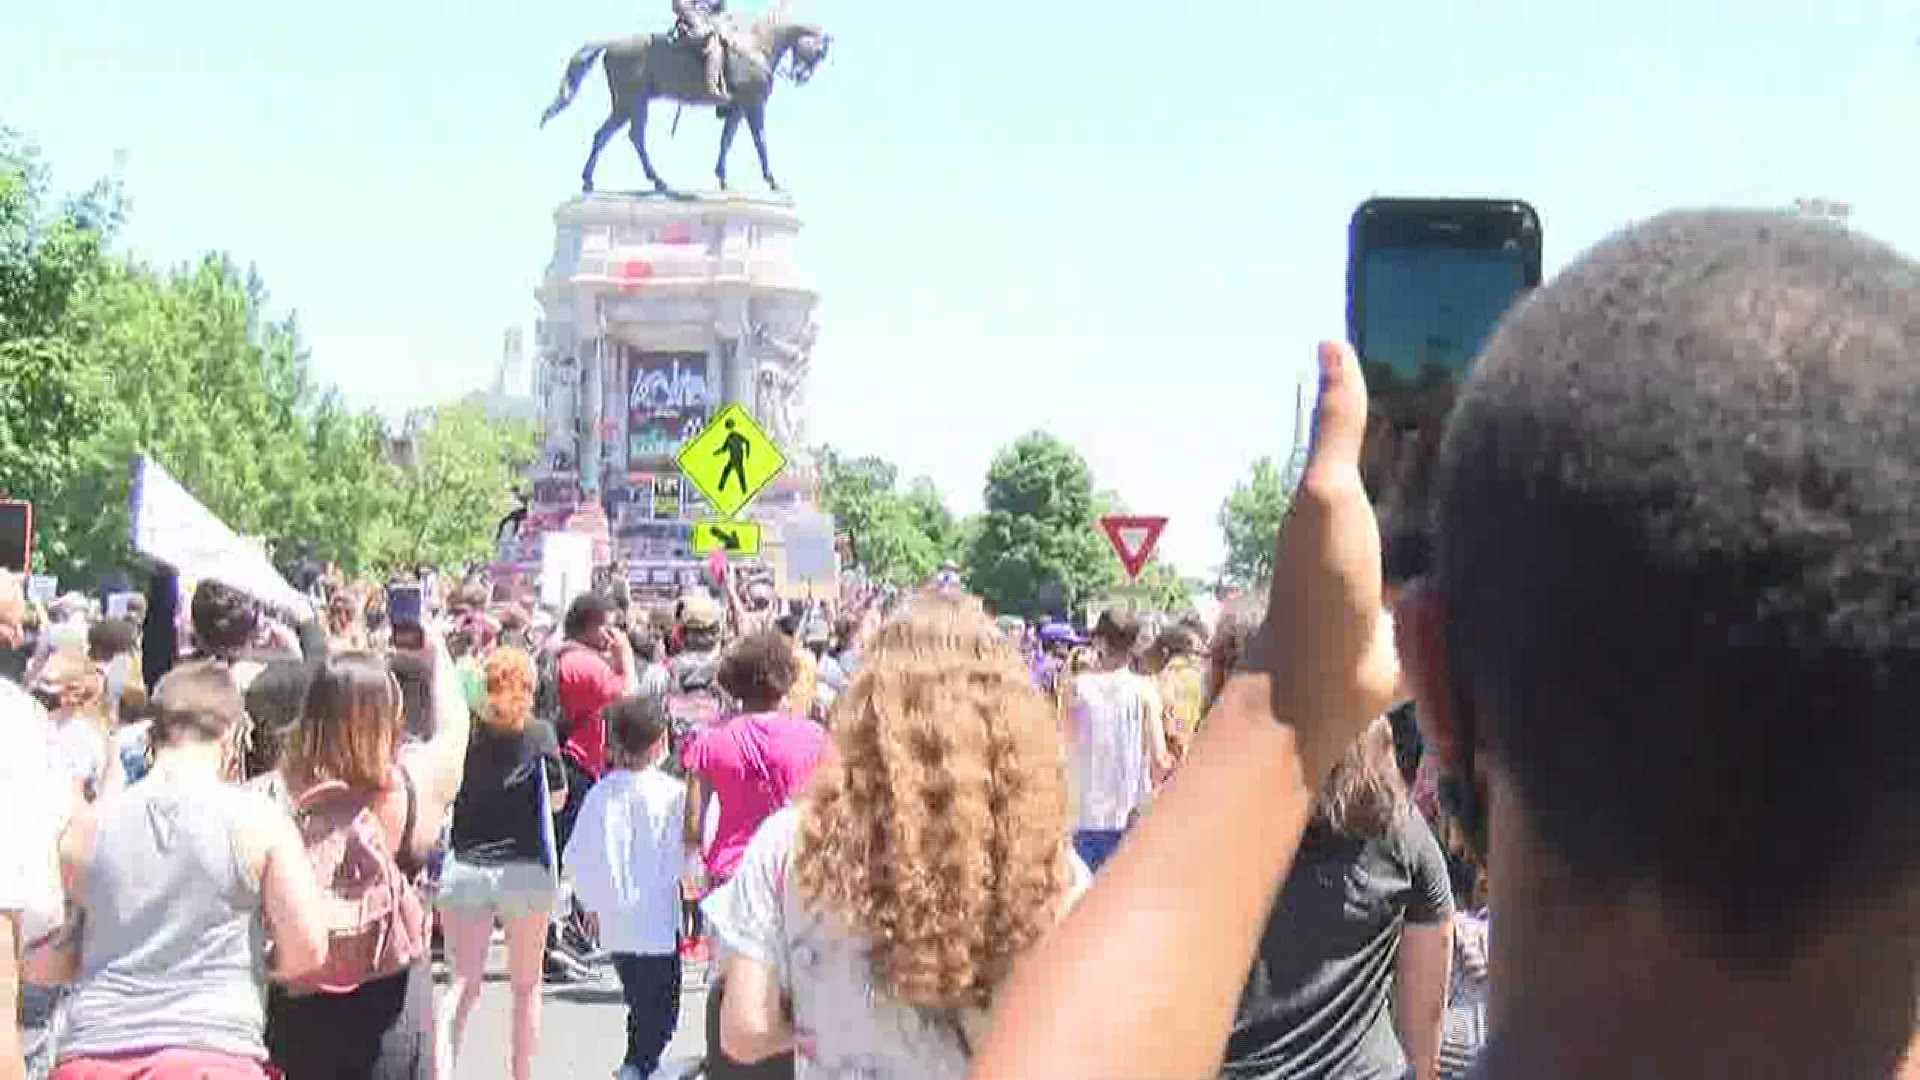 Protesters took to the streets at the Virginia State Capitol on Saturday. Protesters want the monument of Robert E. Lee to be taken down. (VIDEO: WWBT)